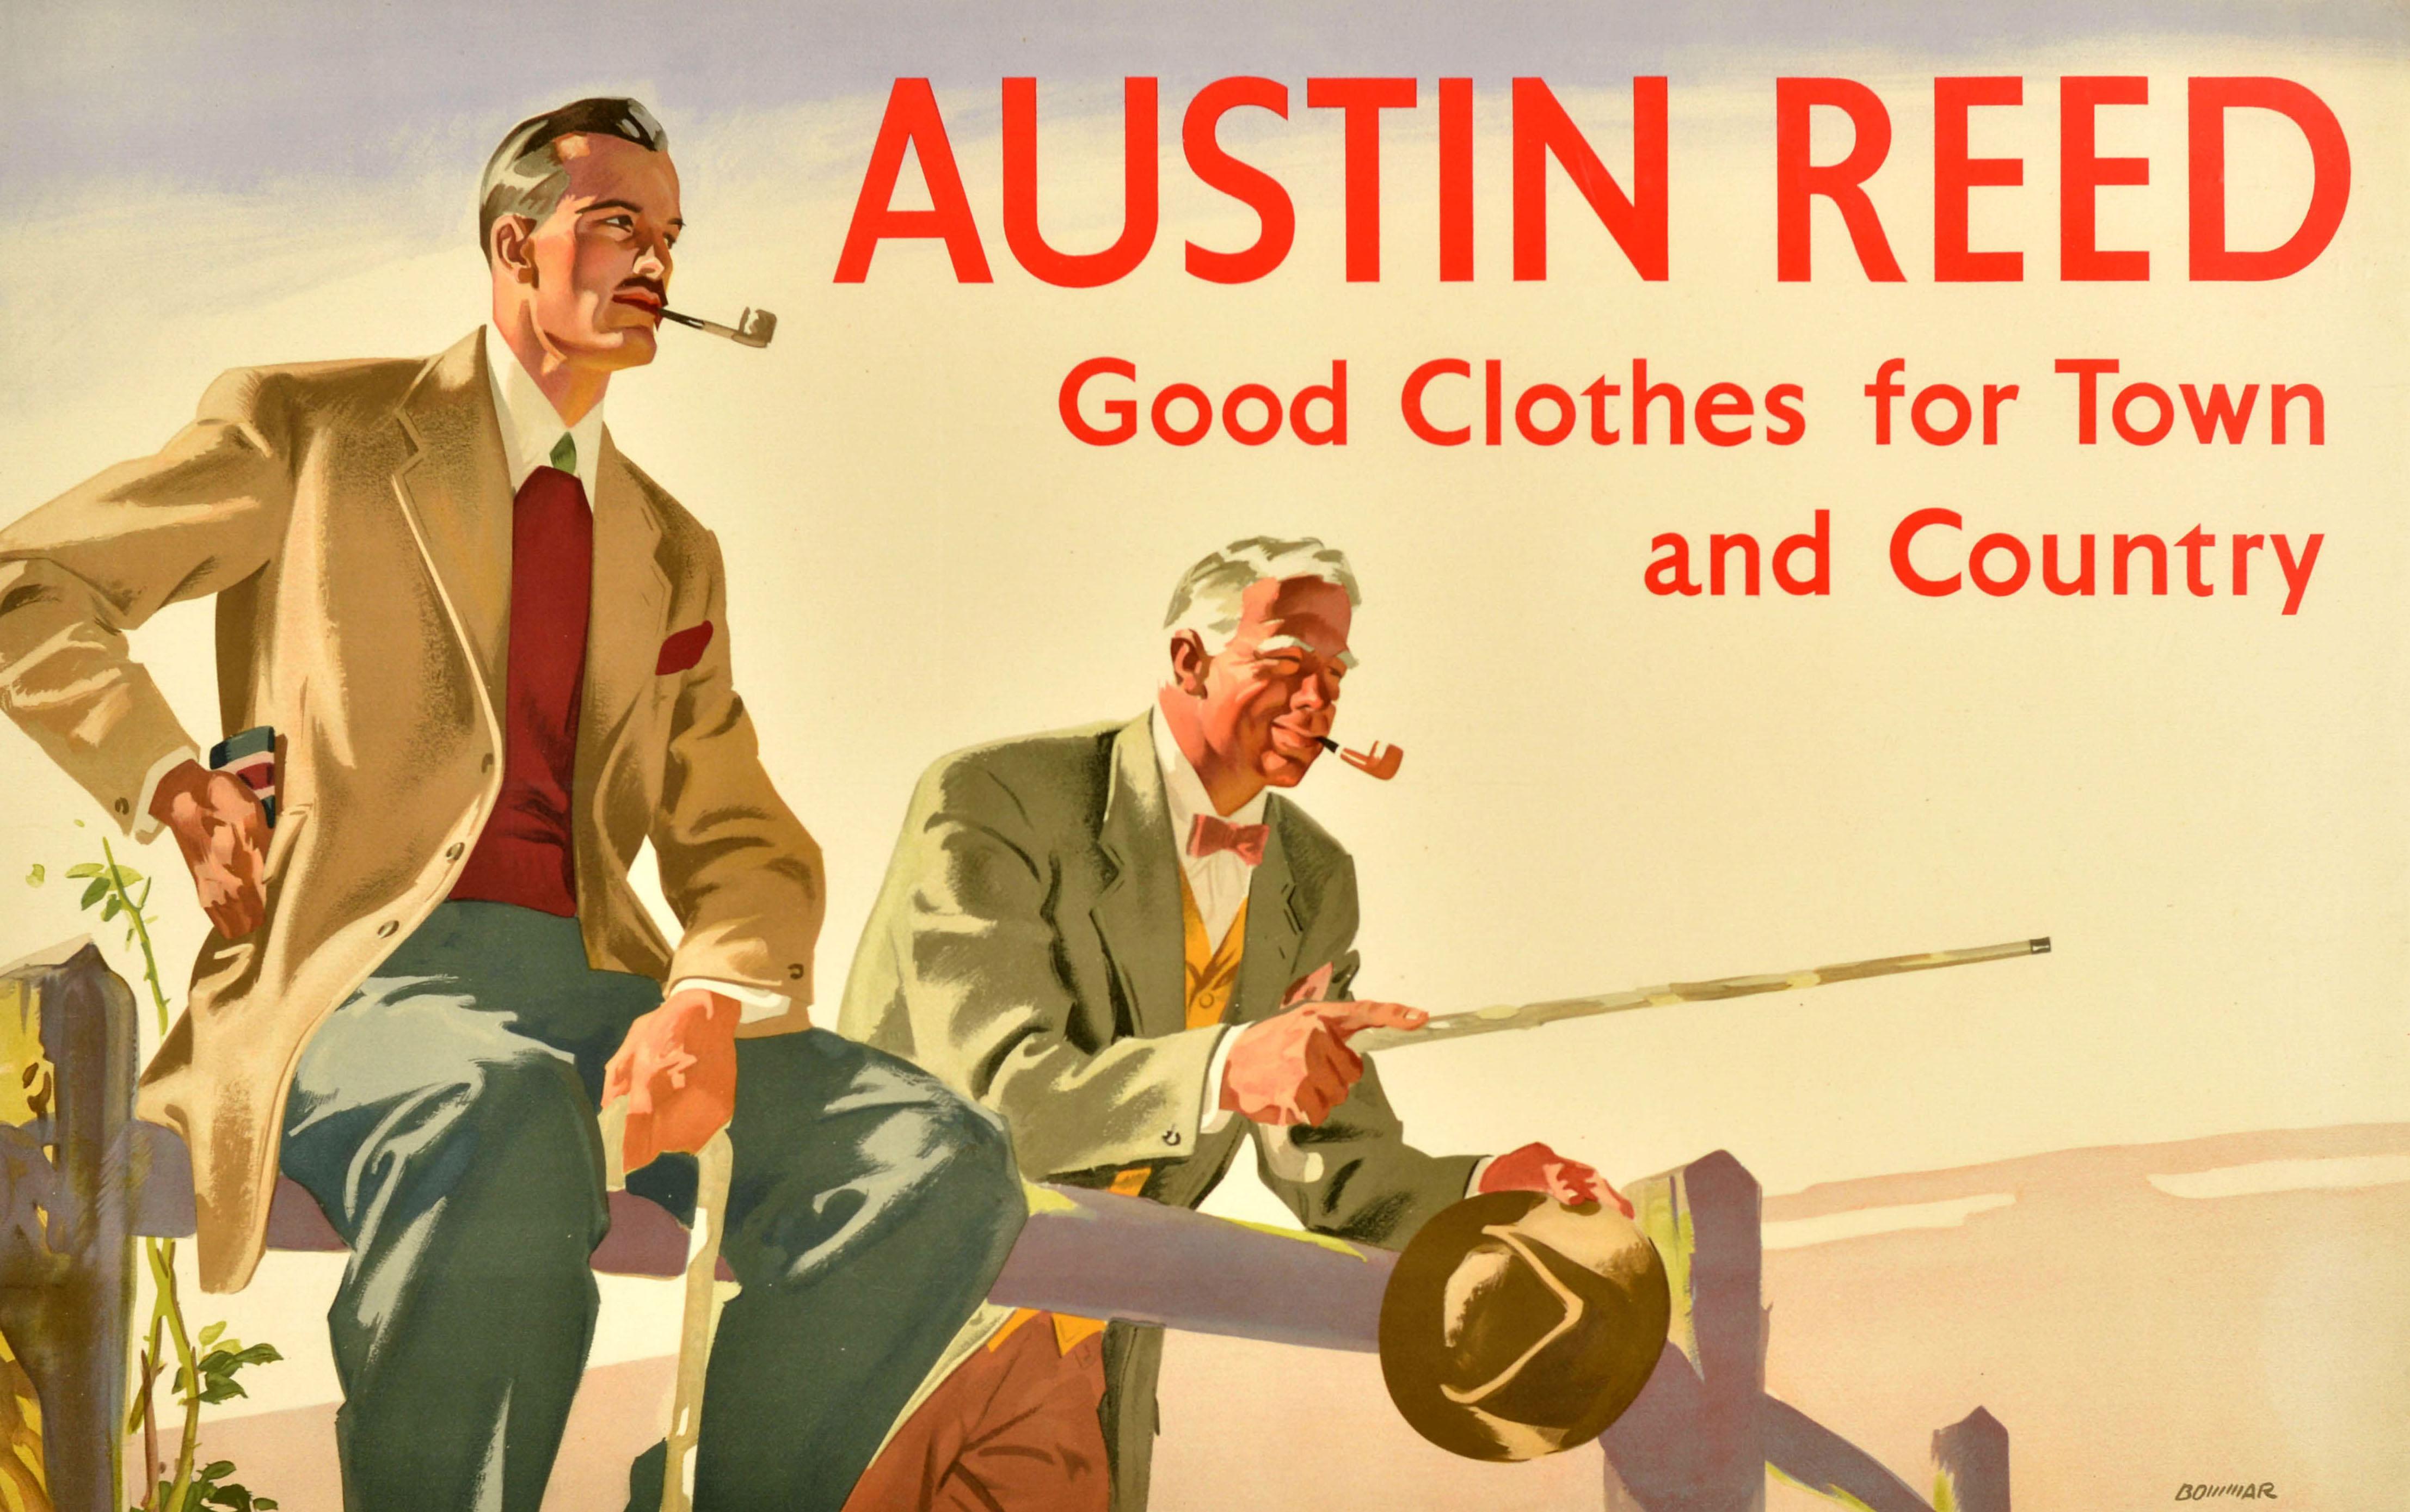 Original Vintage Fashion Advertising Poster Austin Reed Good Clothes Design Art - Print by Unknown